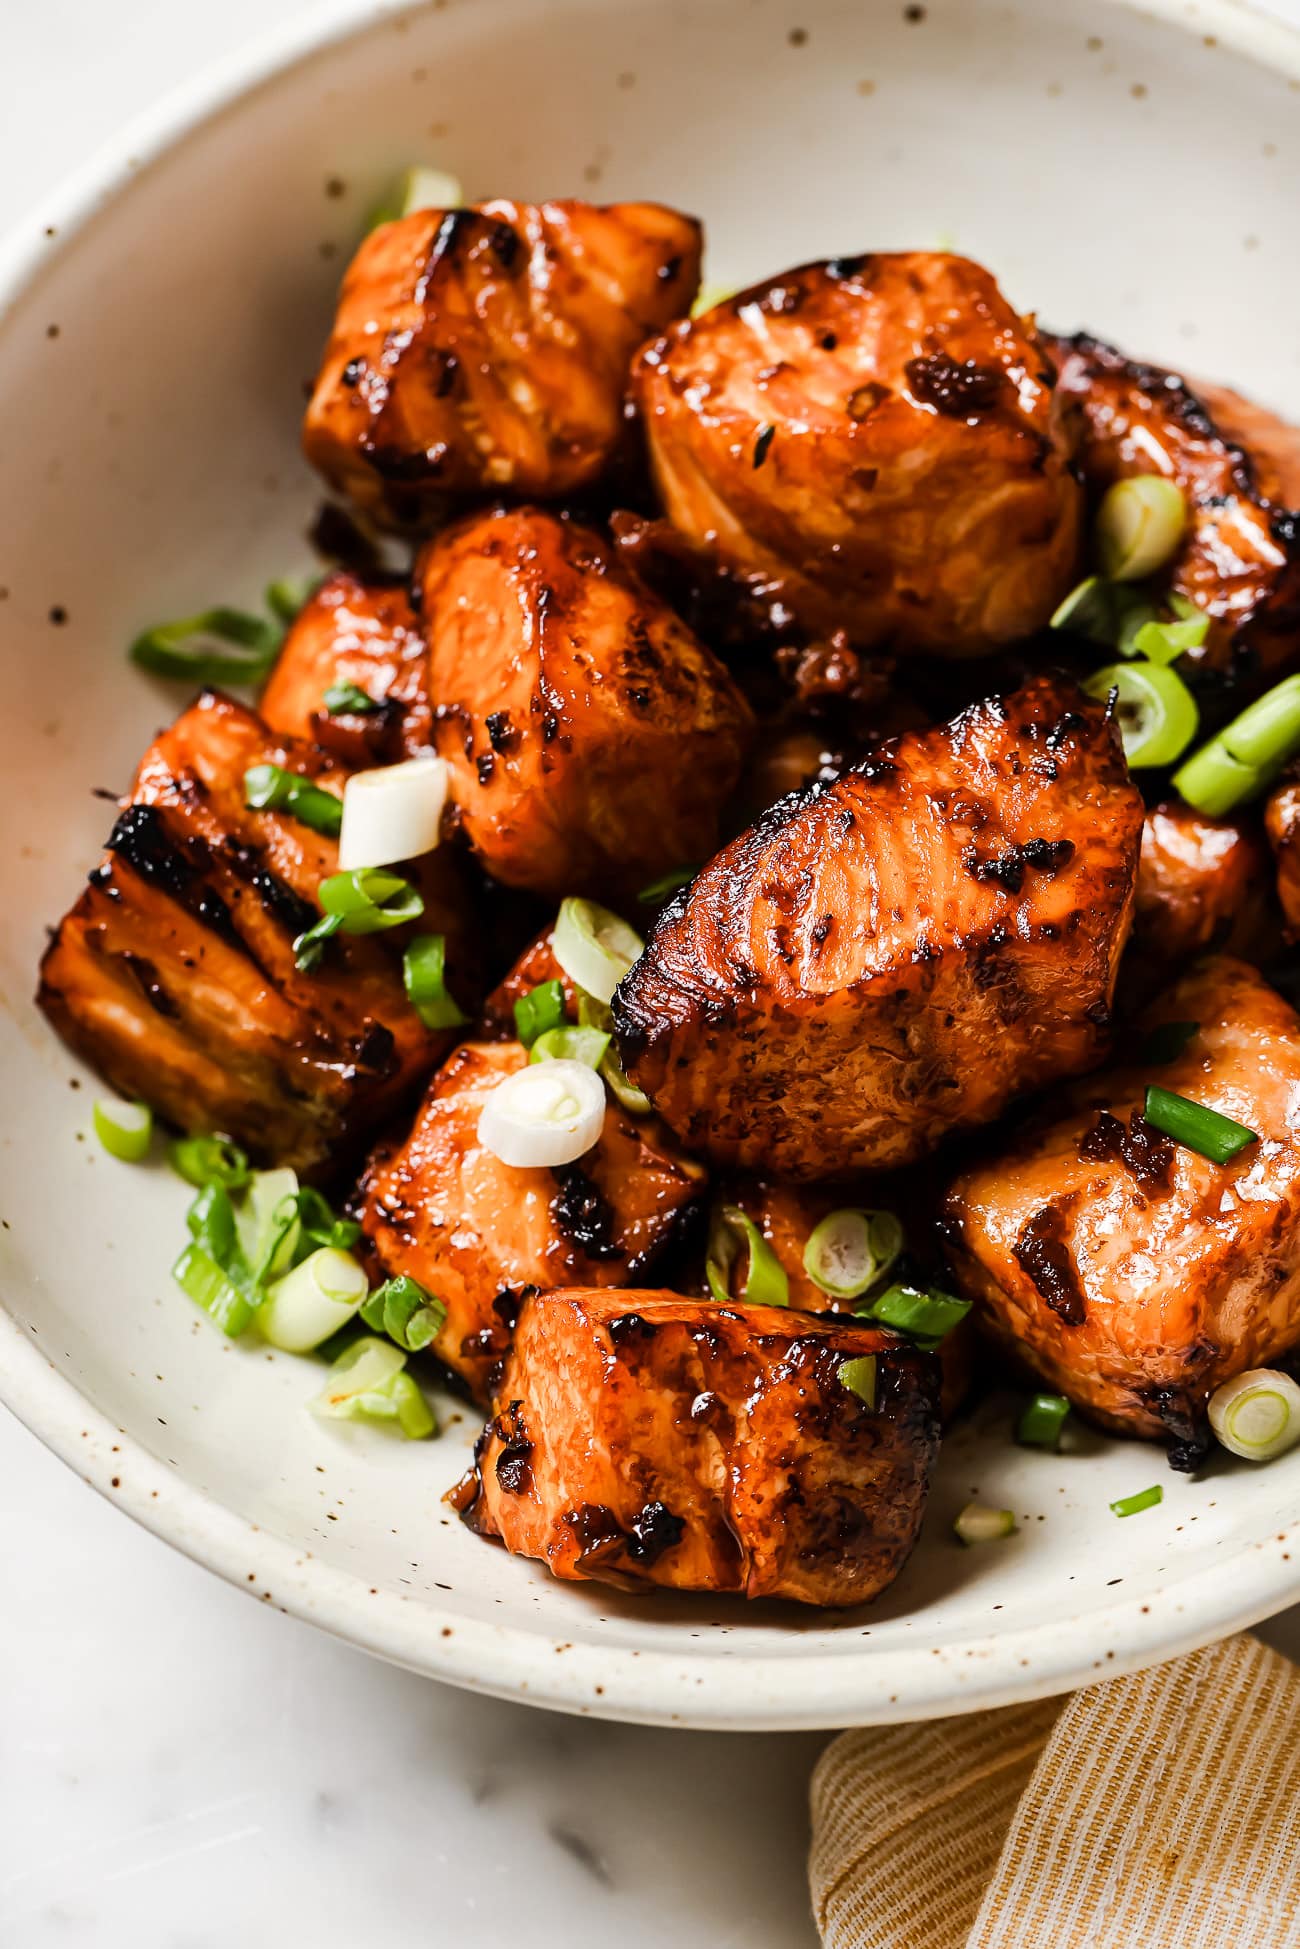 Salmon bites in a bowl garnished with green onions.